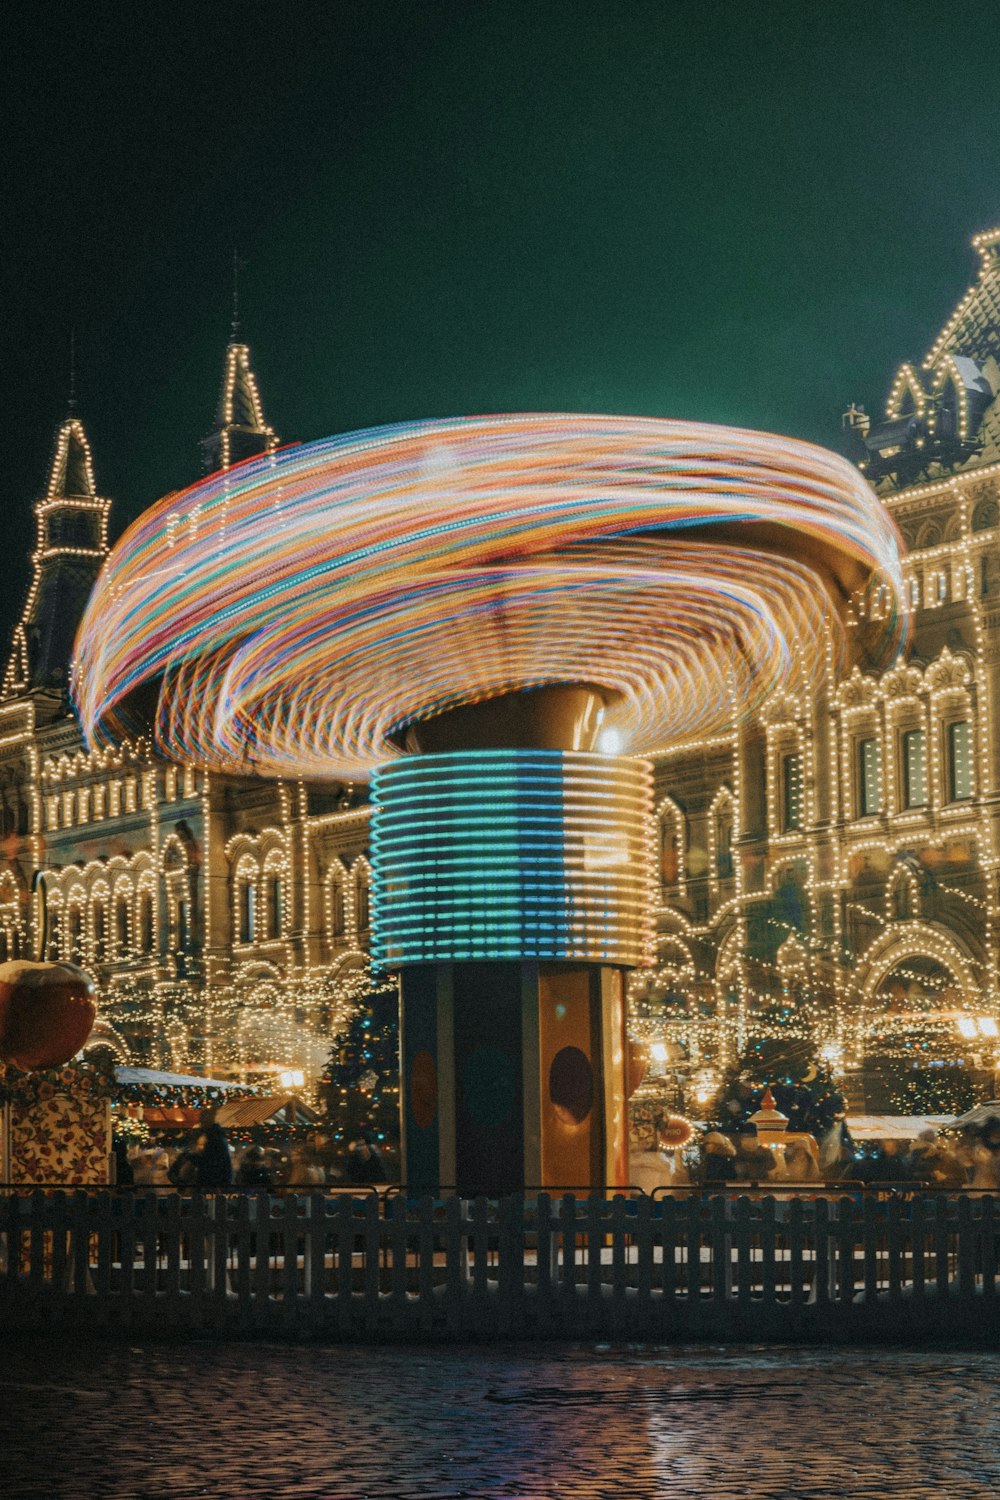 a merry go round in front of a large building